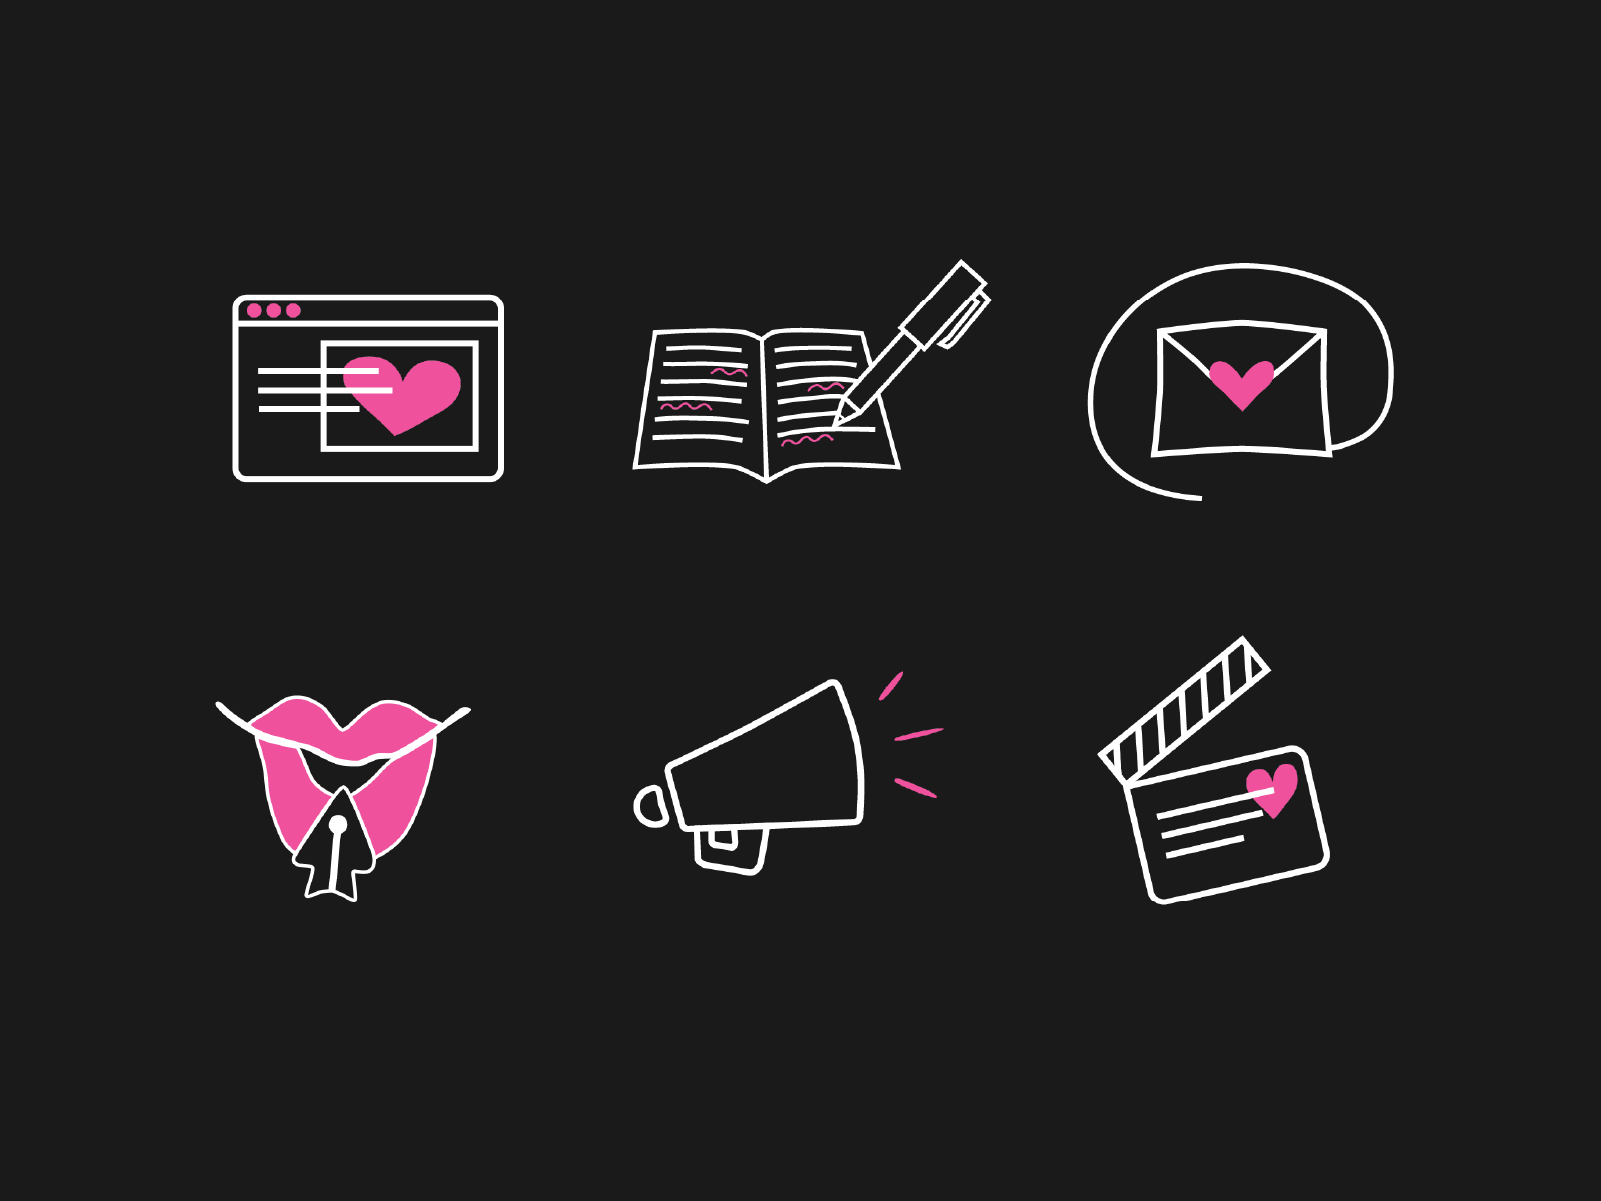 white lined icon set with pink heart accents, including a web page, editing pages in a book, and and email envelope.